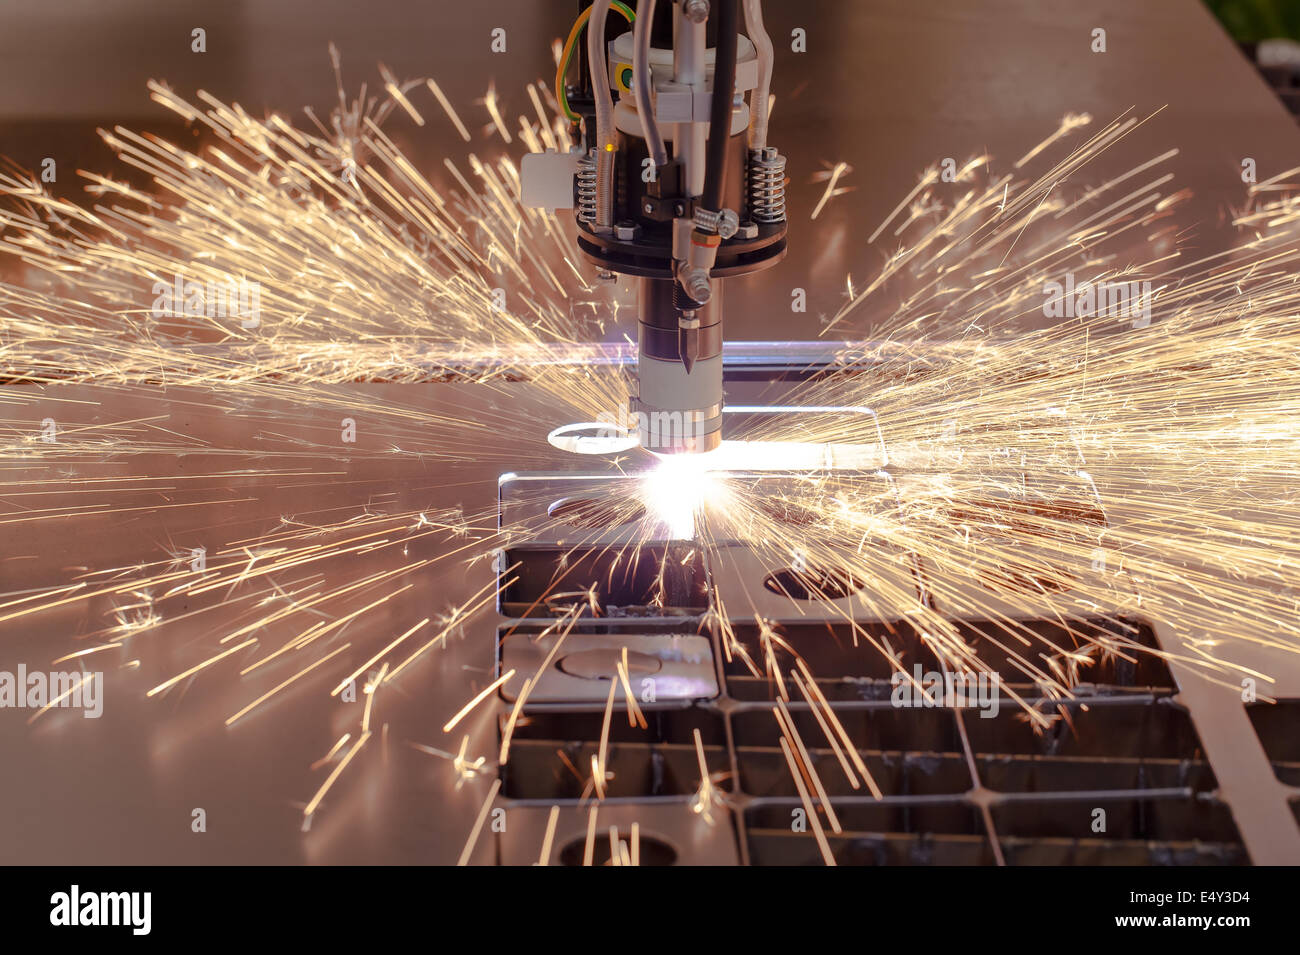 Plasma cutting process of metal with sparks Stock Photo